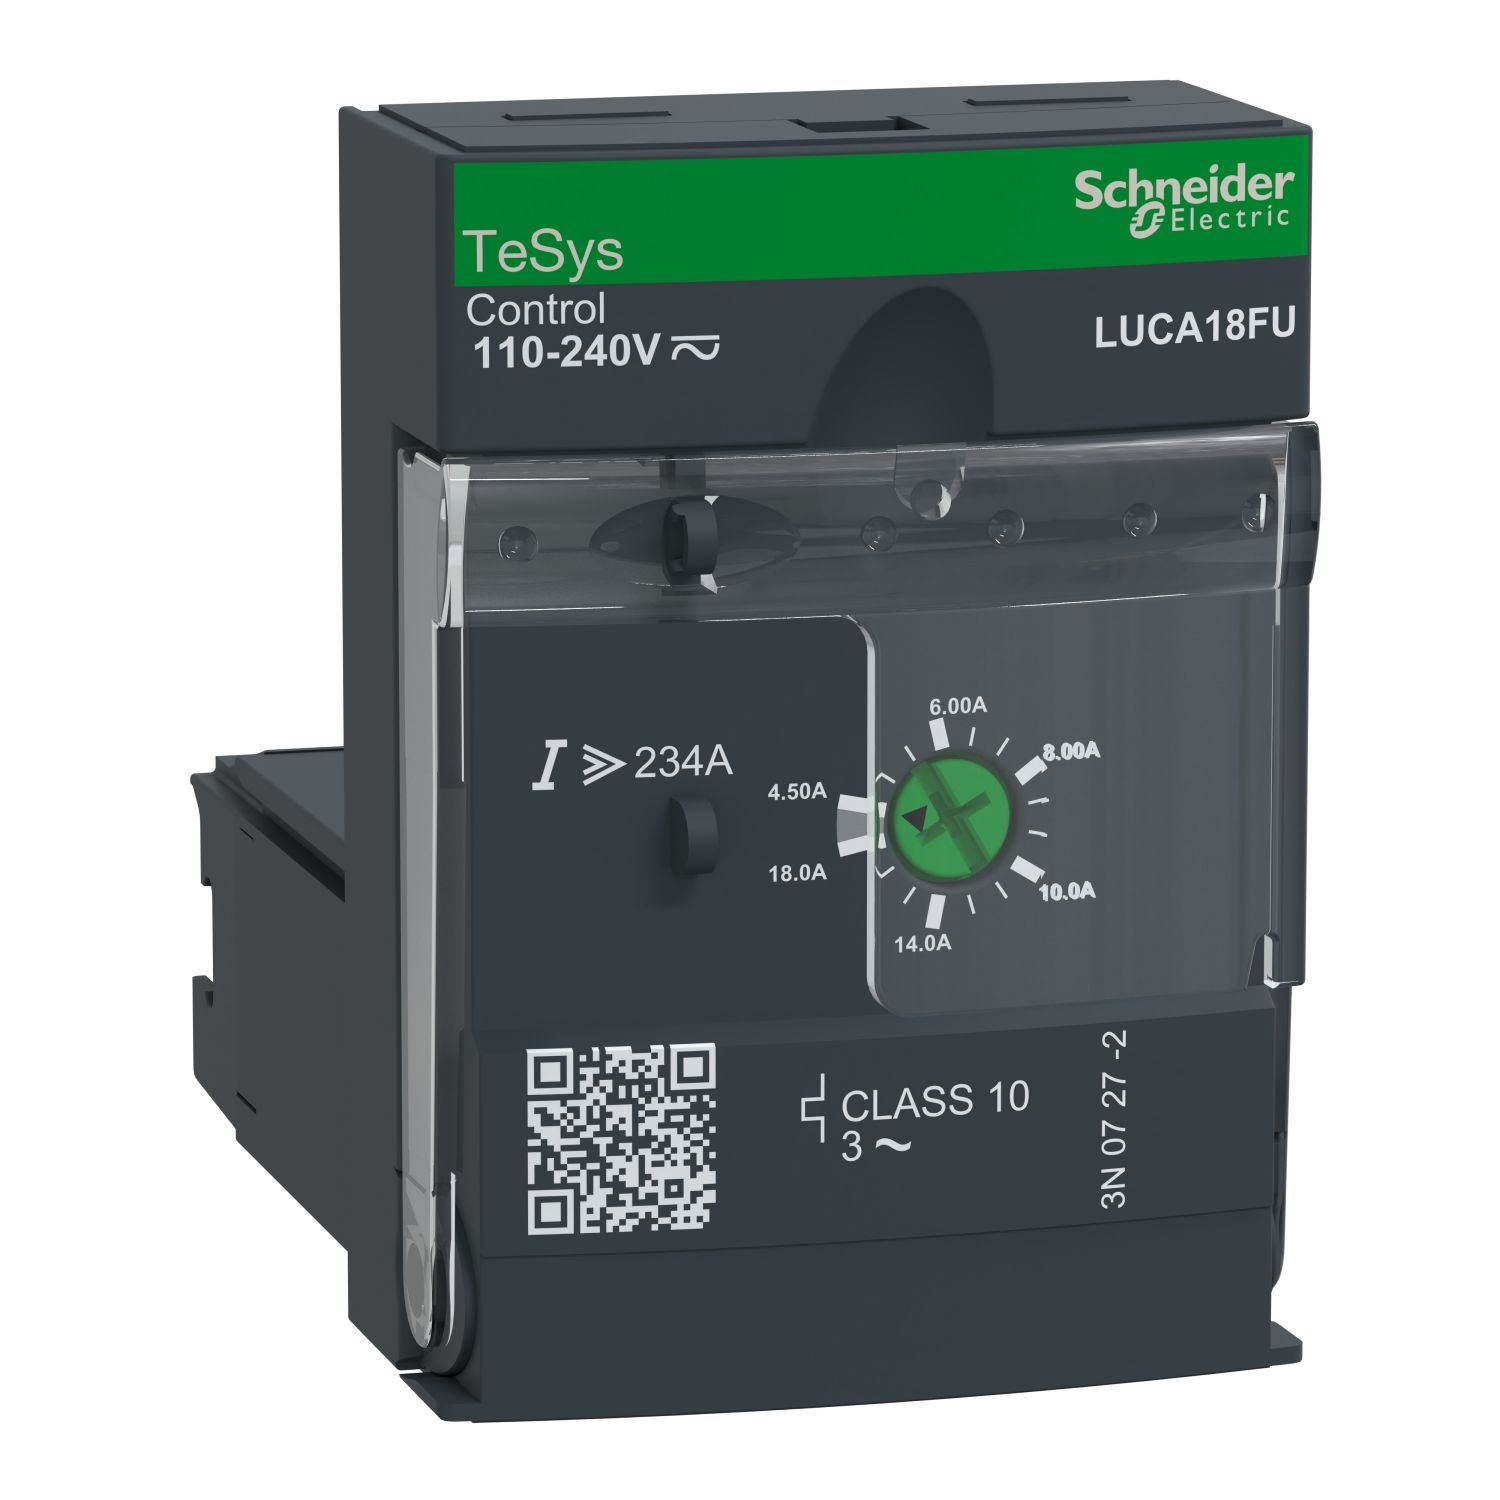 LUCA18FU Standard control unit, TeSys U, 4.5-18A, 3P motors, thermal magnetic protection, class 10, coil 110-240V AC/DC